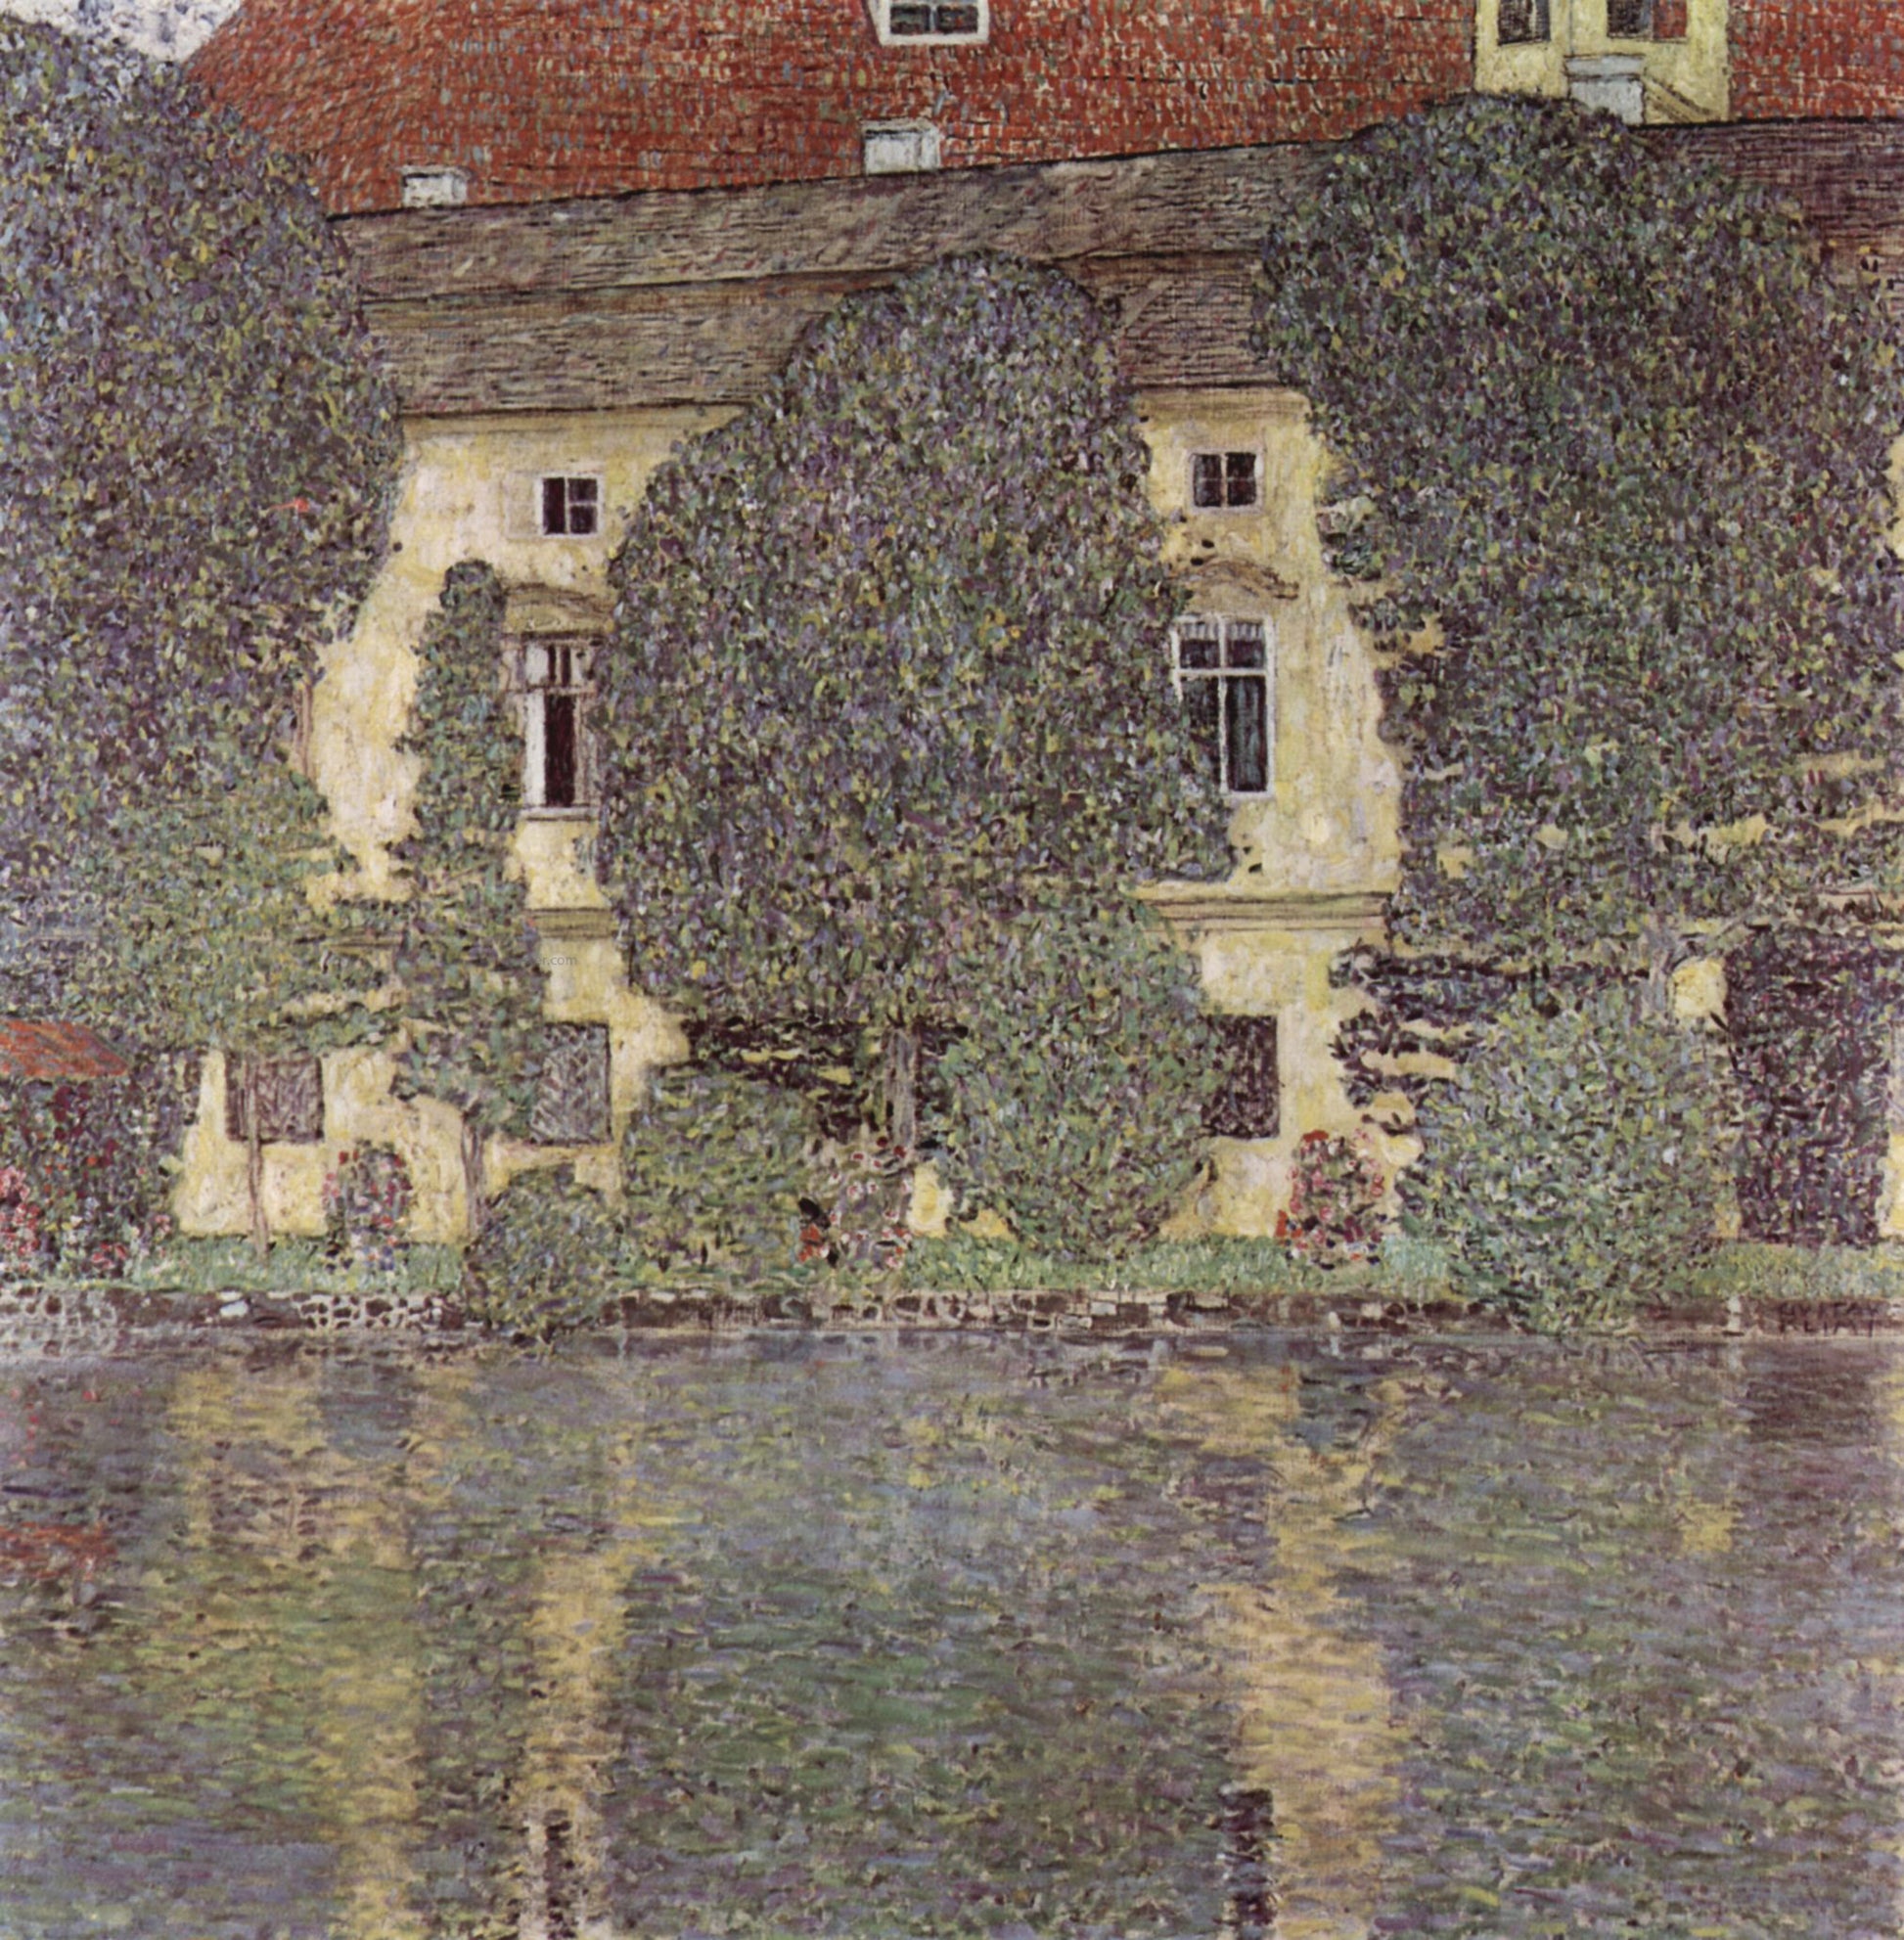  Gustav Klimt The Schloss Kammer on the Attersee III - Hand Painted Oil Painting